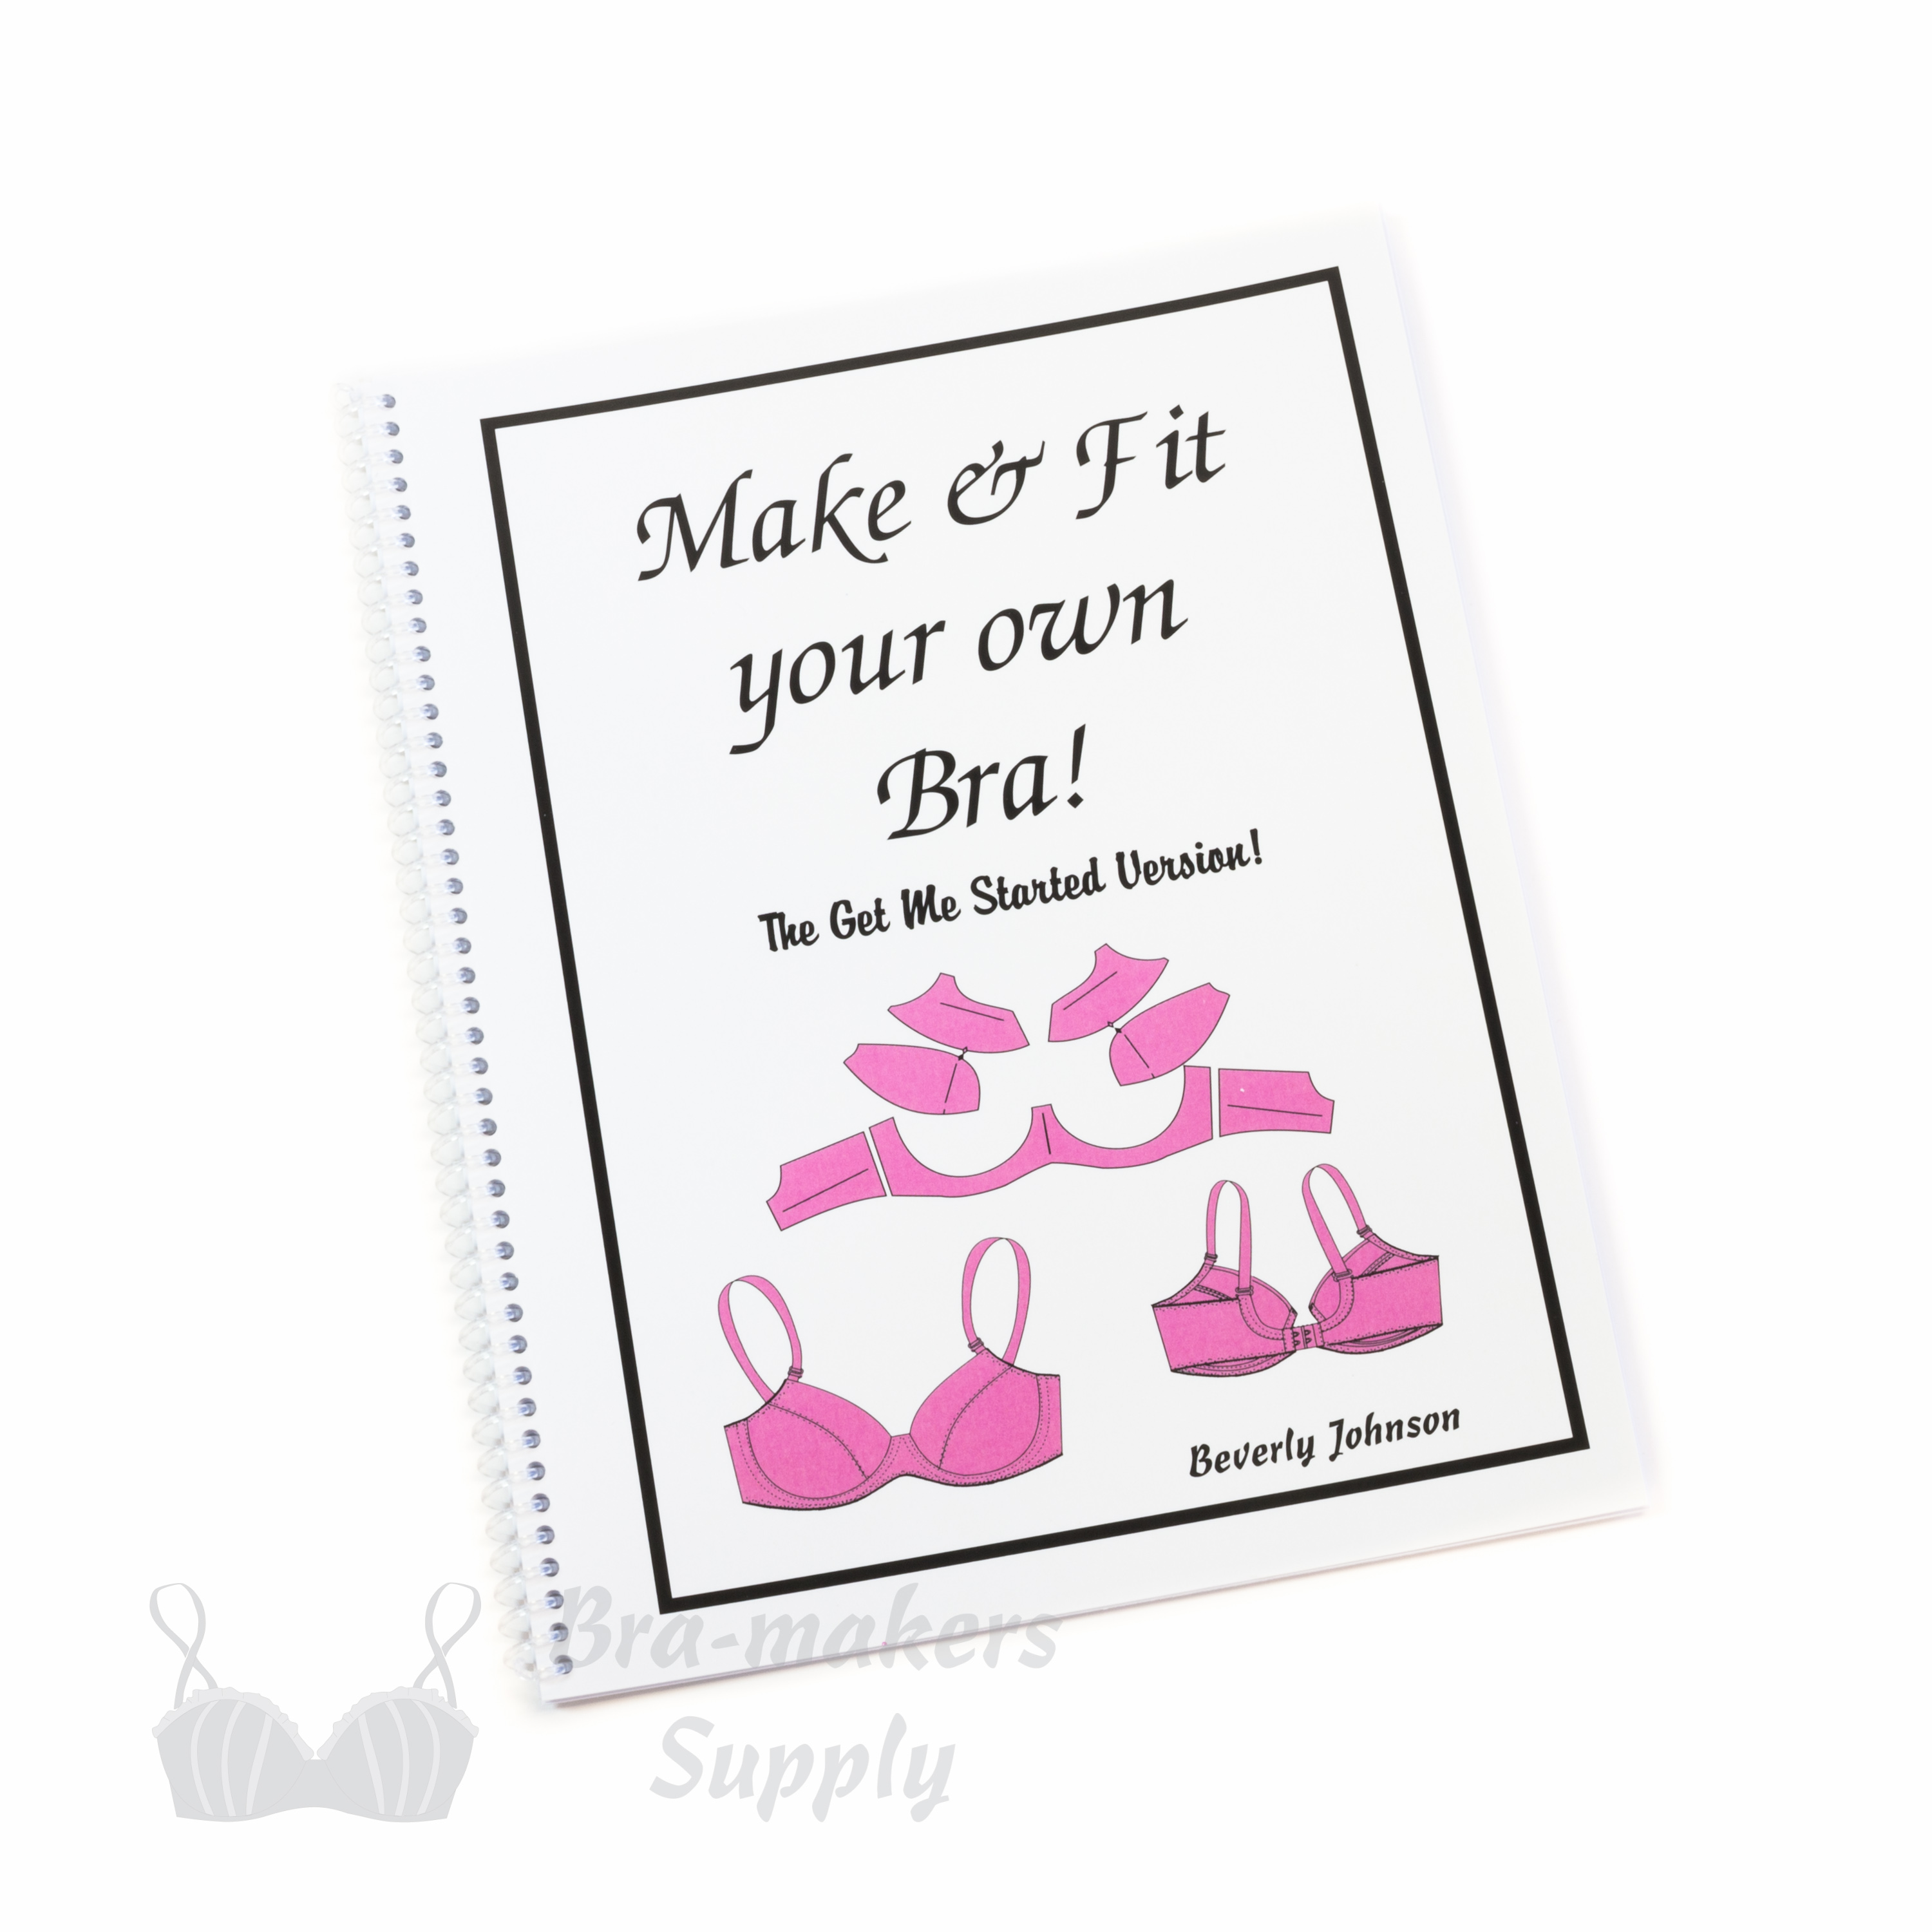 https://www.braandcorsetsupplies.com/wp-content/uploads/2016/09/make-fit-your-own-bra-book-by-Beverly-V.-Johnson-QB-200-from-Bra-Makers-Supply-front-cover-shown.jpg